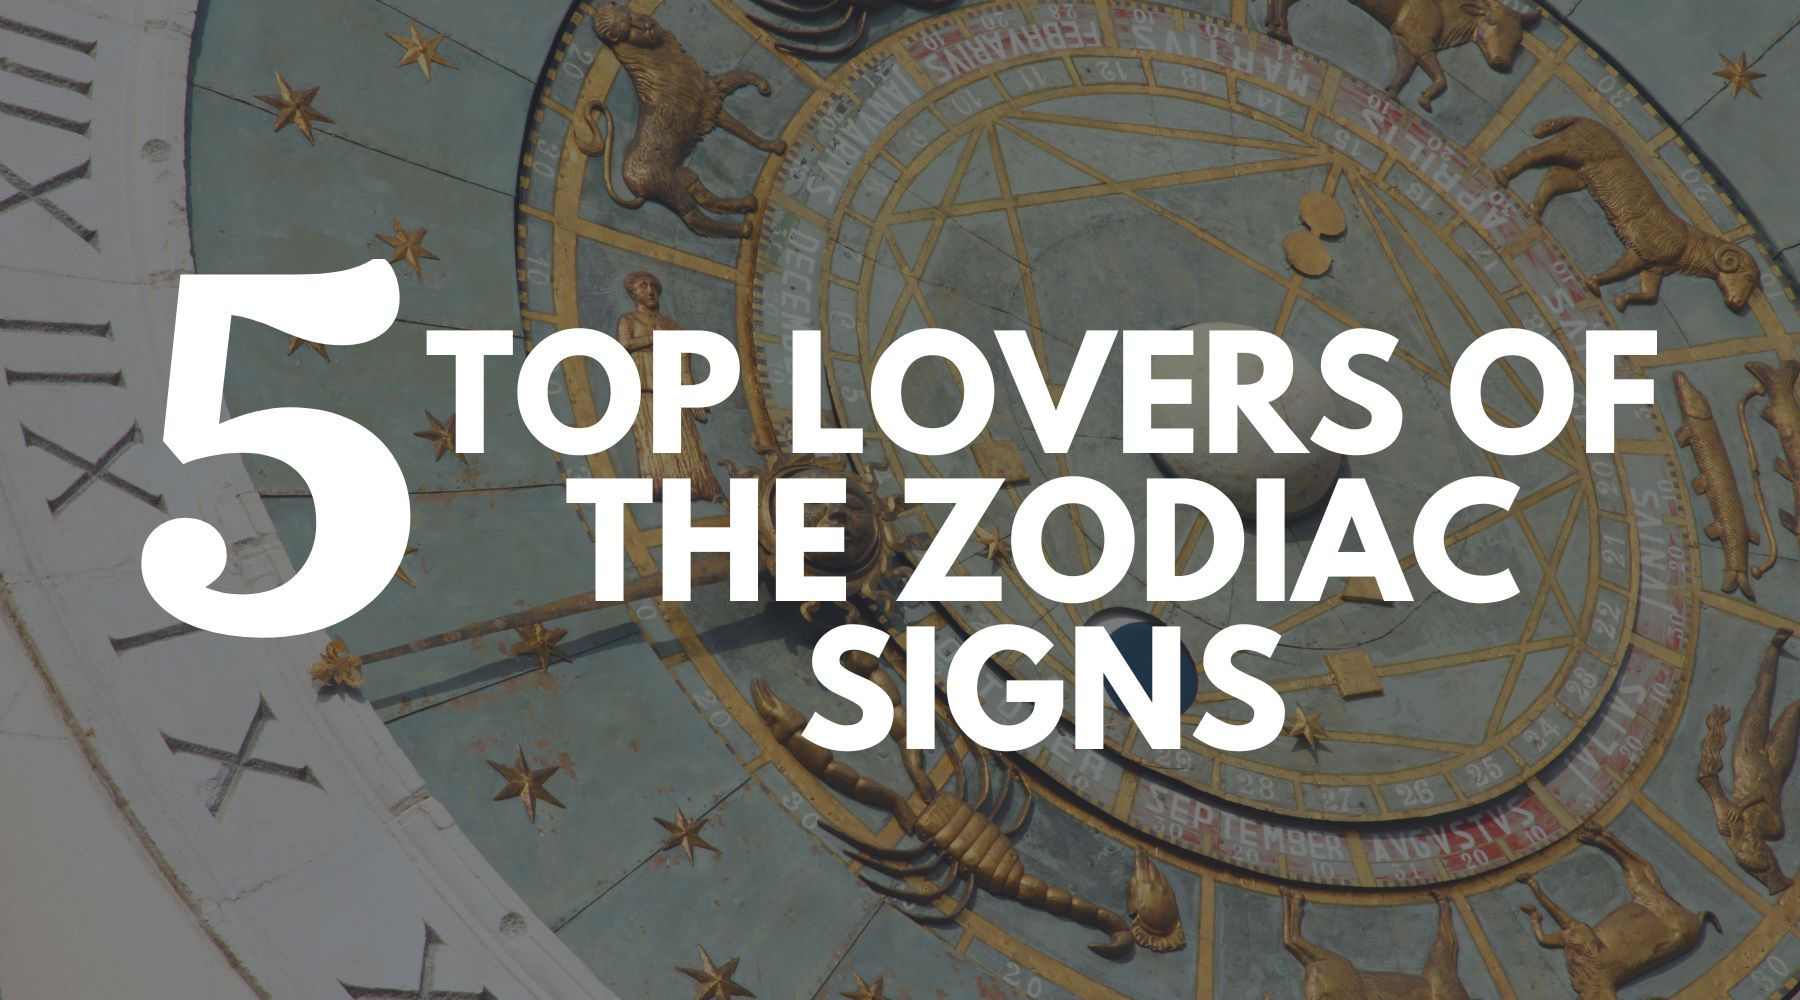 The top 5 lovers of the zodiac signs-You are in for a wild ride with them